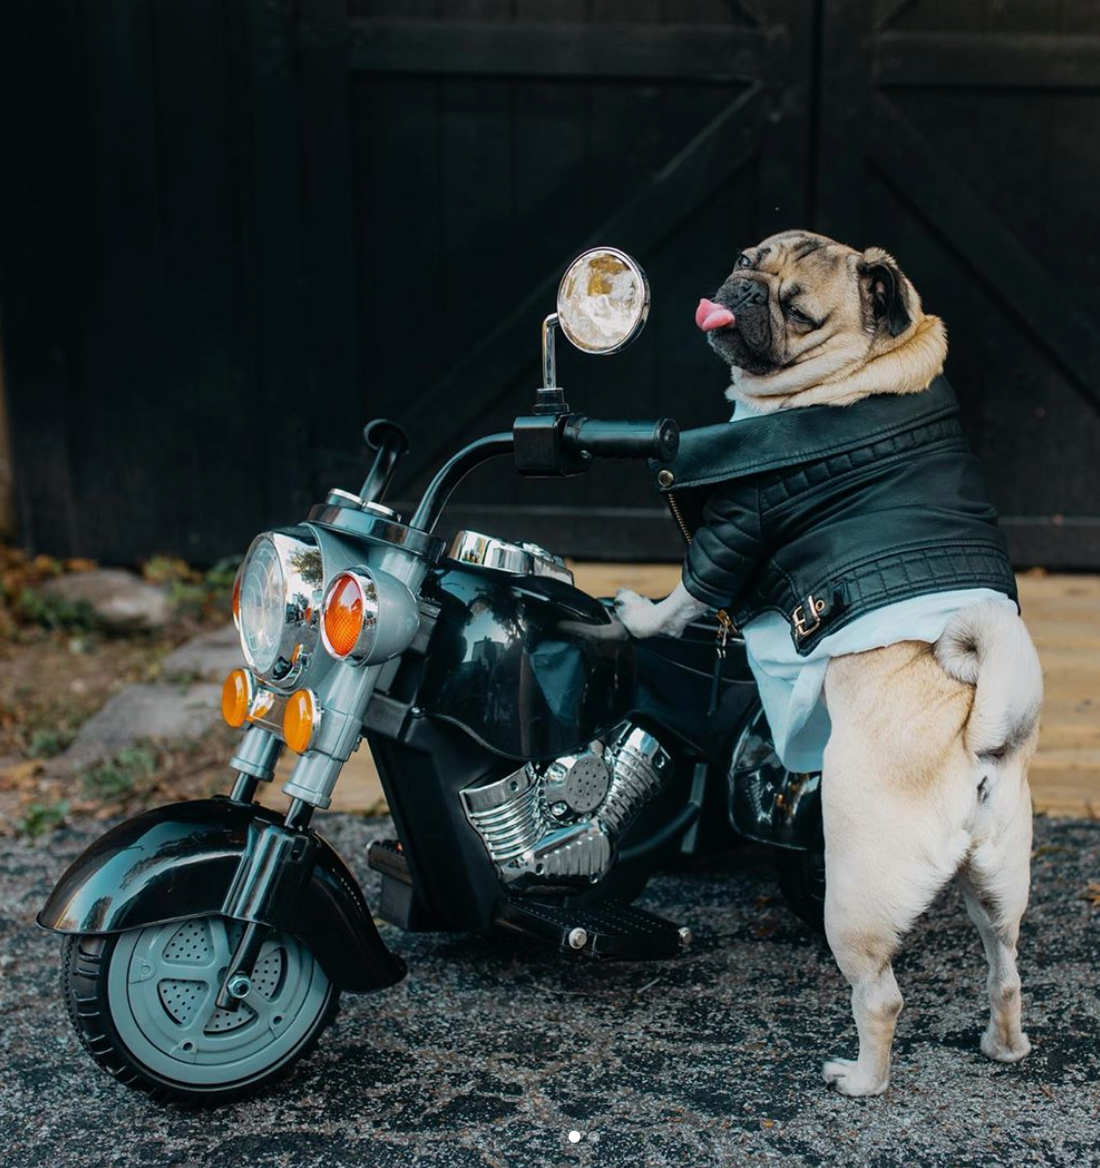 A day in the life of Doug the Pug